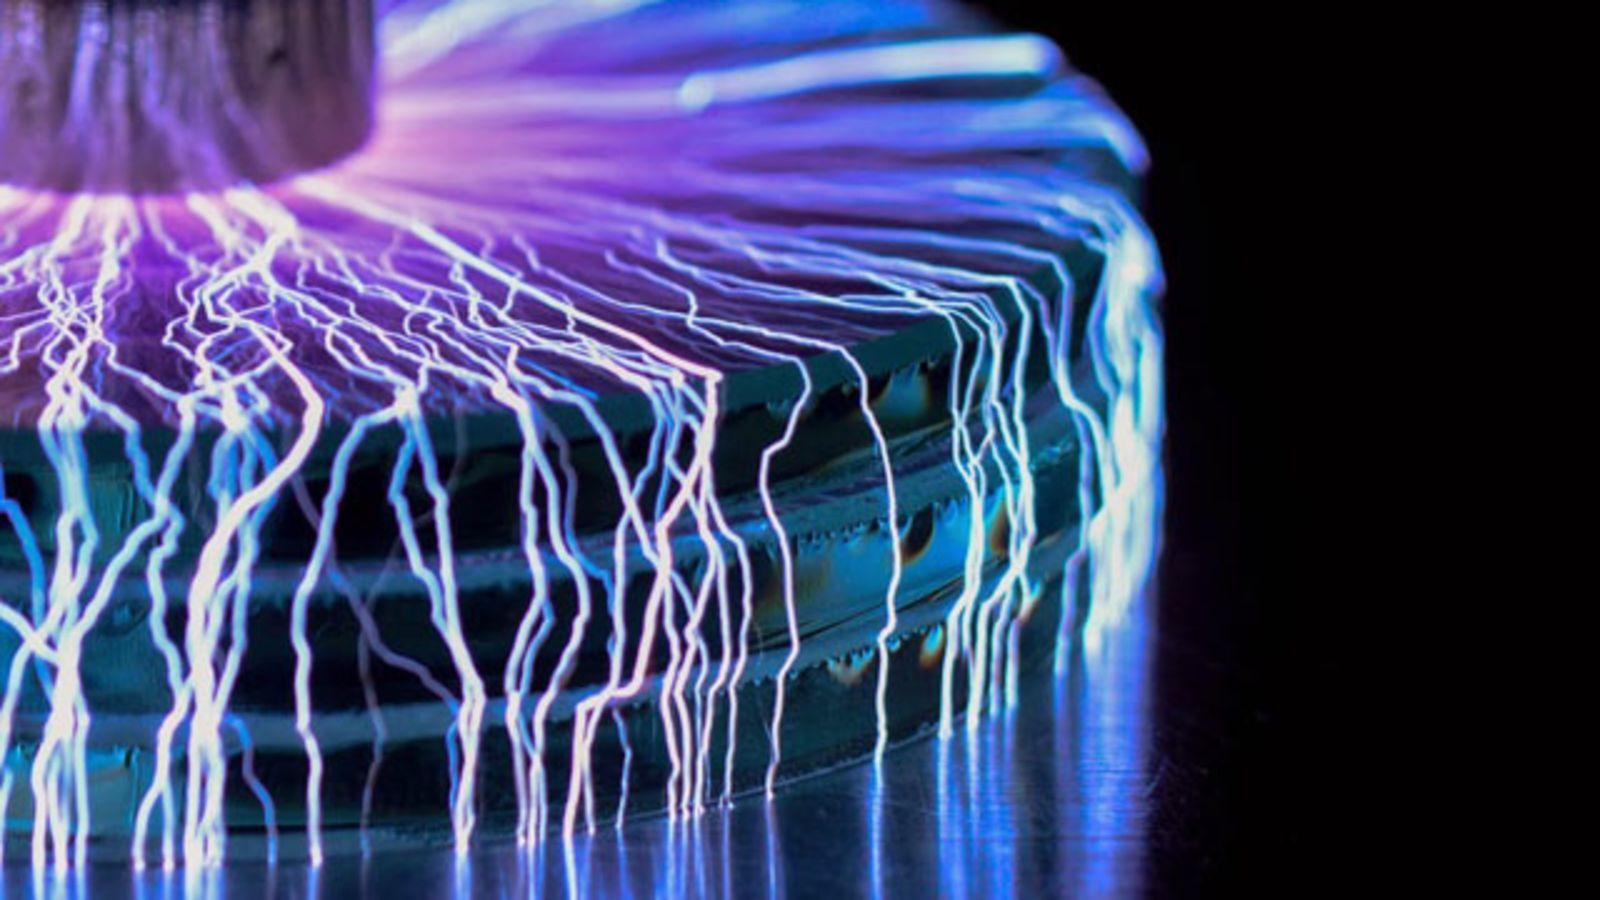 Gorgeous Mini Lightning Storms Created With Portable Tesla